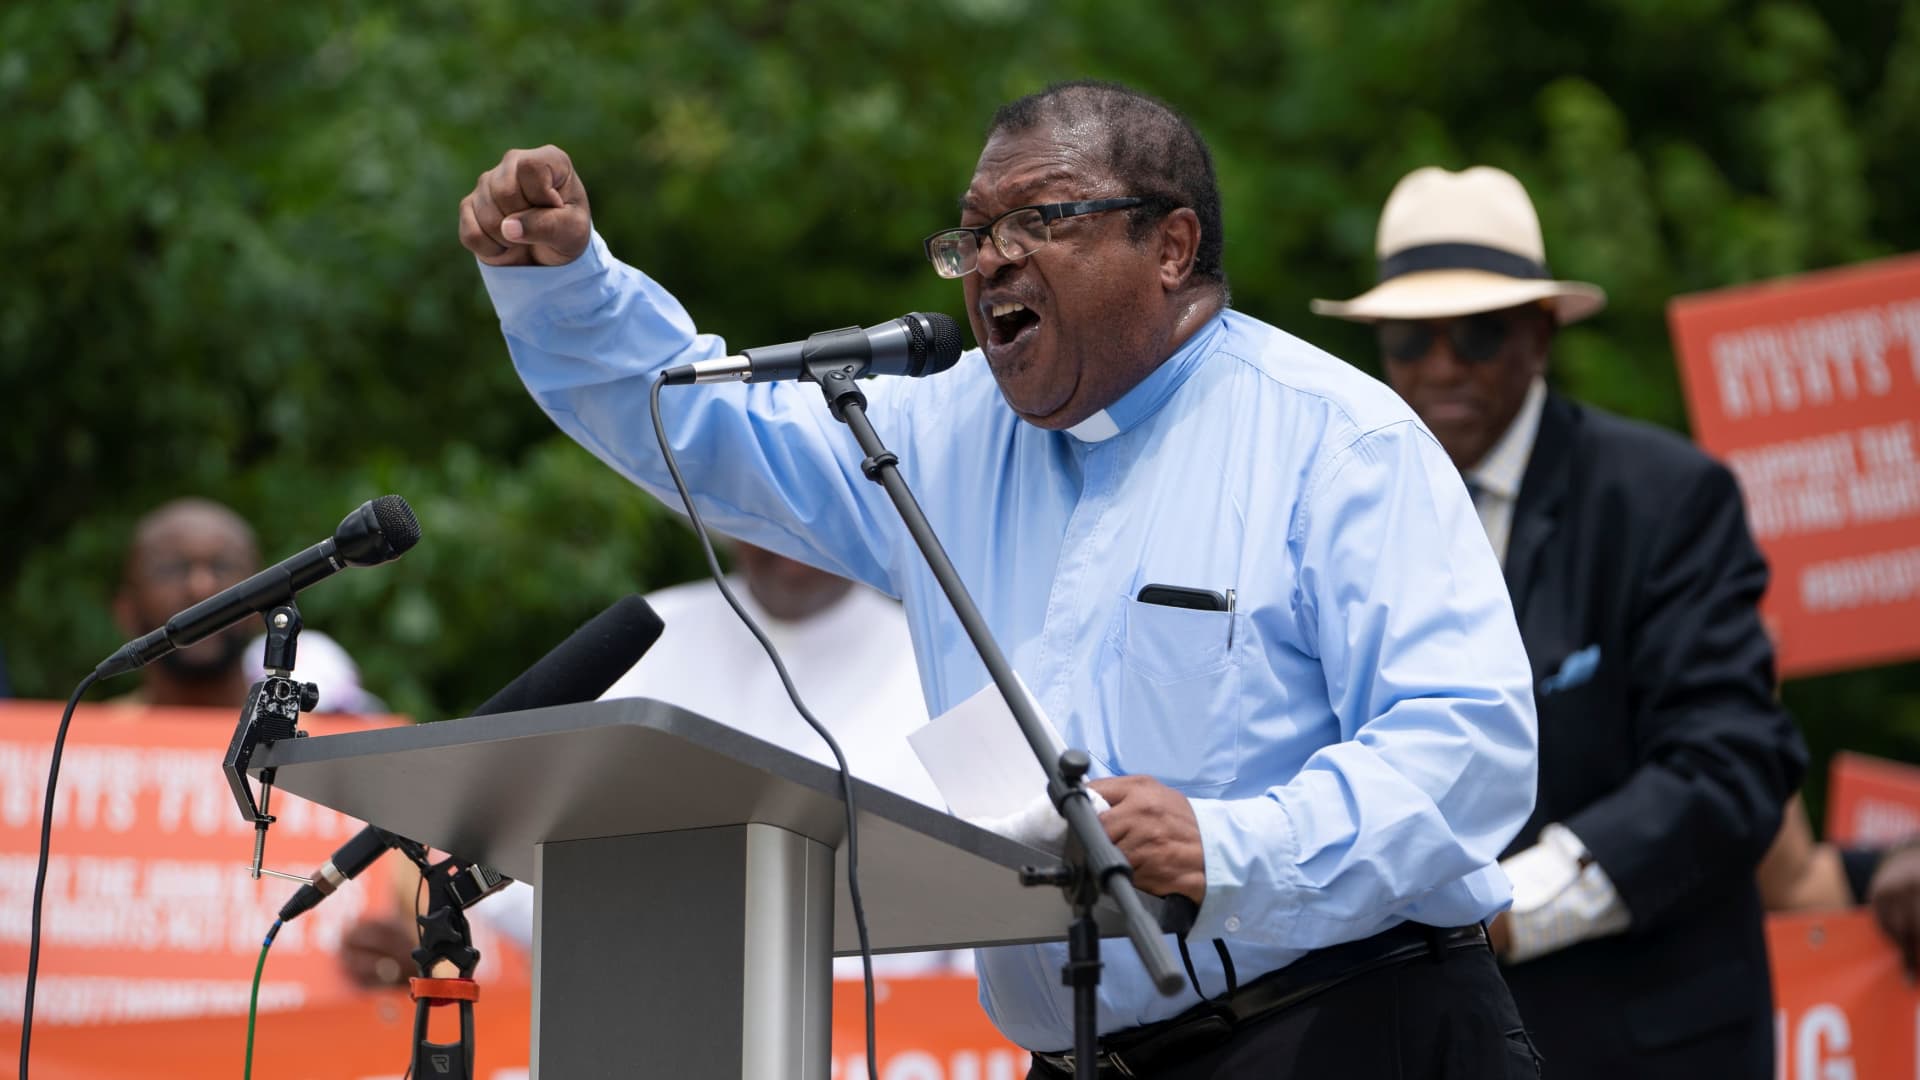 Pastor Timothy McDonald III speaks during a rally against the state's new voting restrictions outside the Georgia State Capitol, in Atlanta, Georgia, U.S., June 8, 2021.